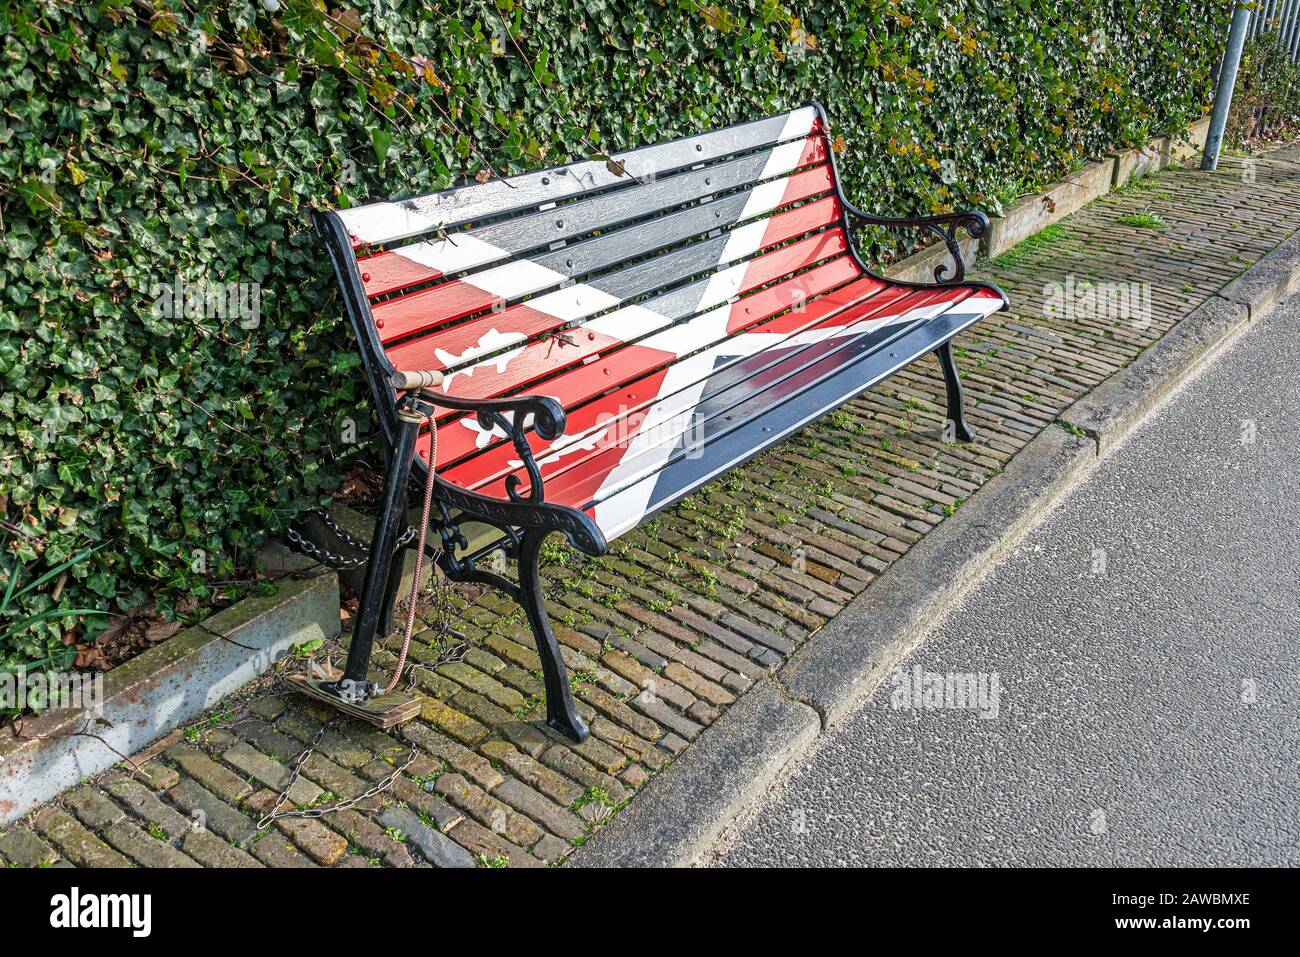 wooden garden bench with red blue and white planks standing on the street with a bicycle pump attached with a chain to the garden bench Stock Photo